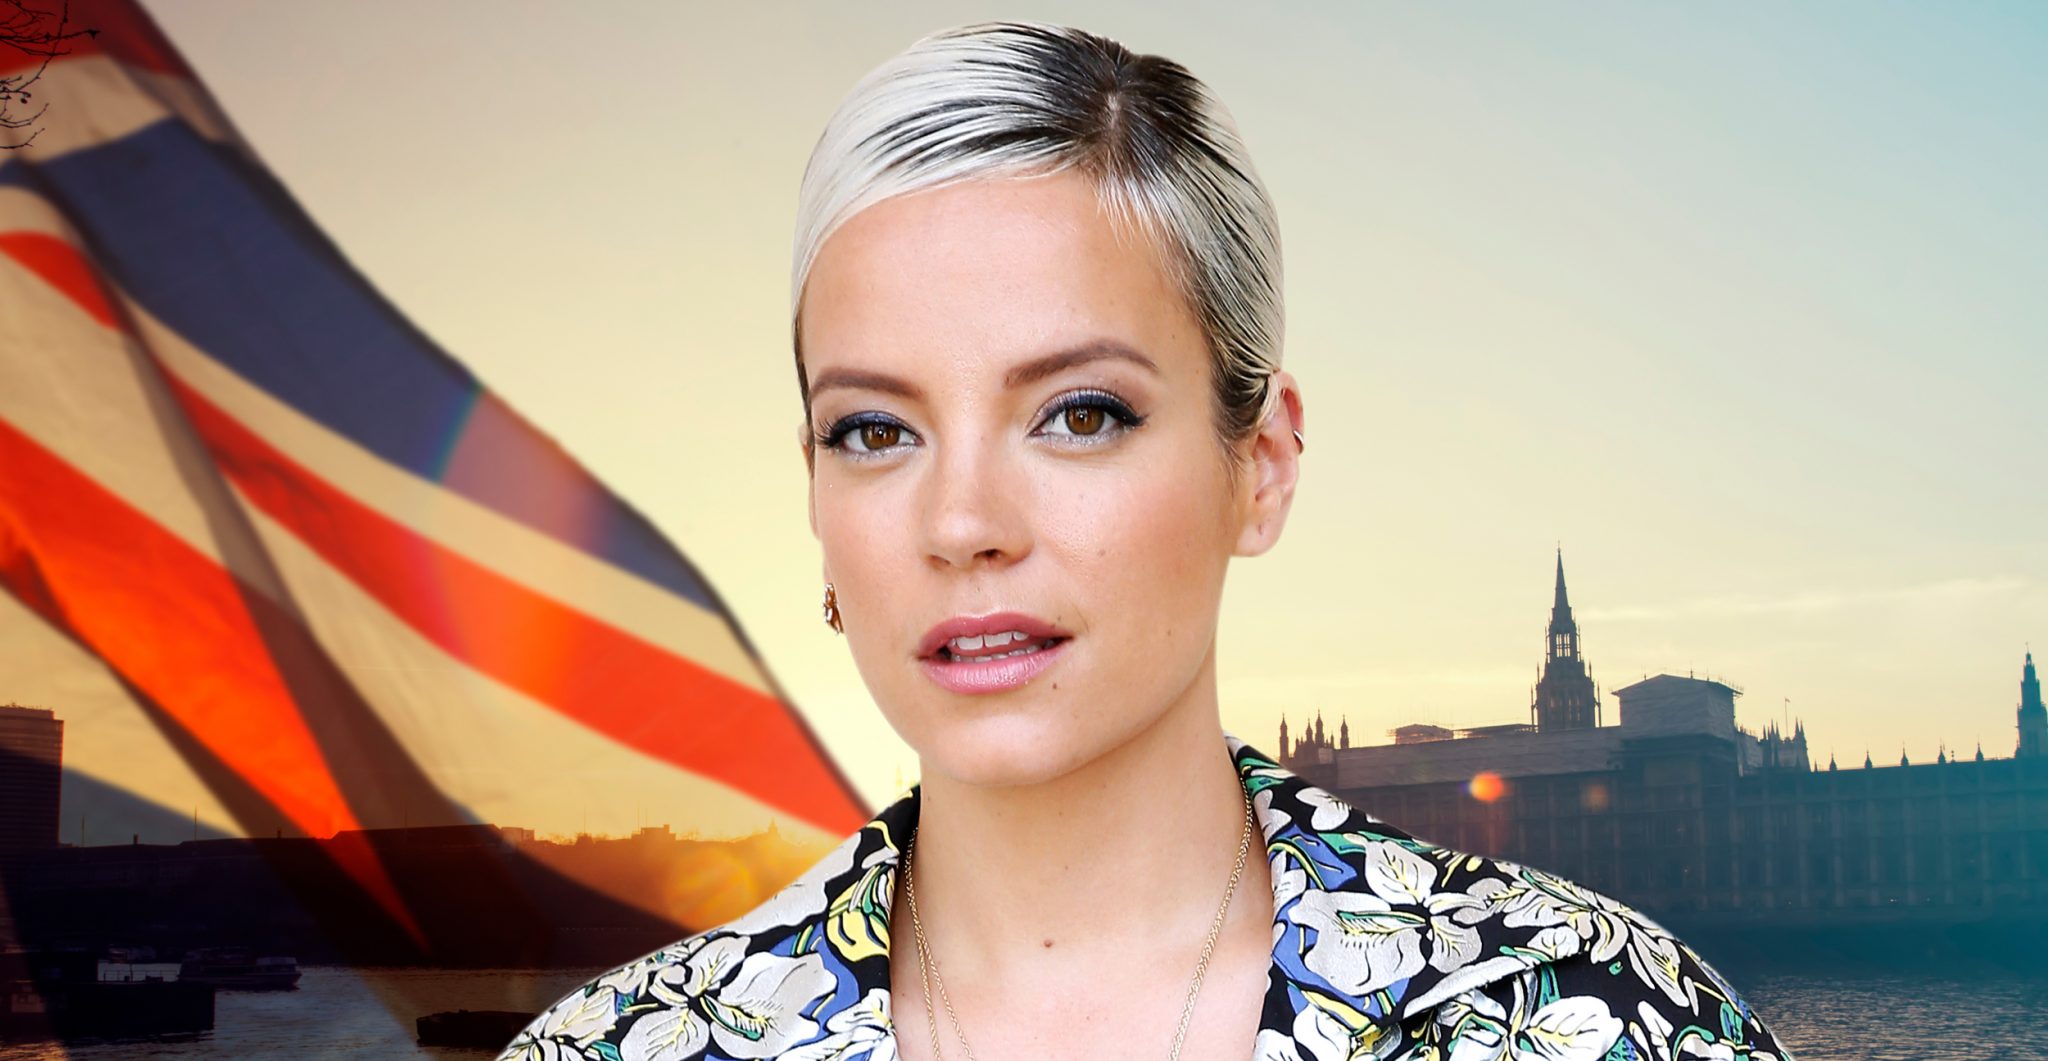 Lily Allen image from Getty